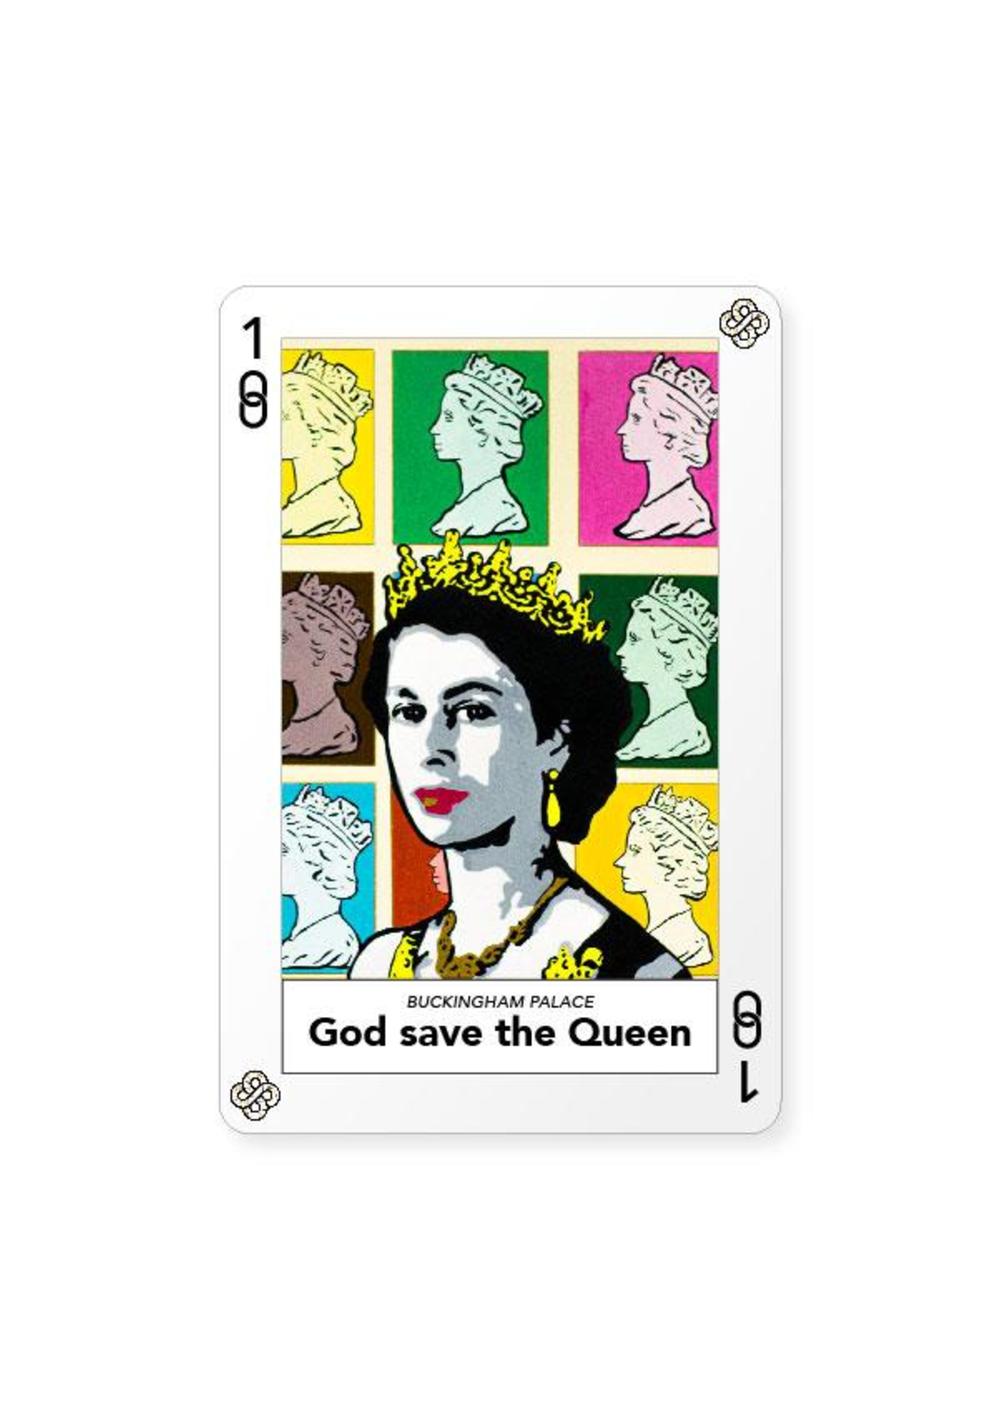 Certificate of Authenticity and Consignment - God save the Queen